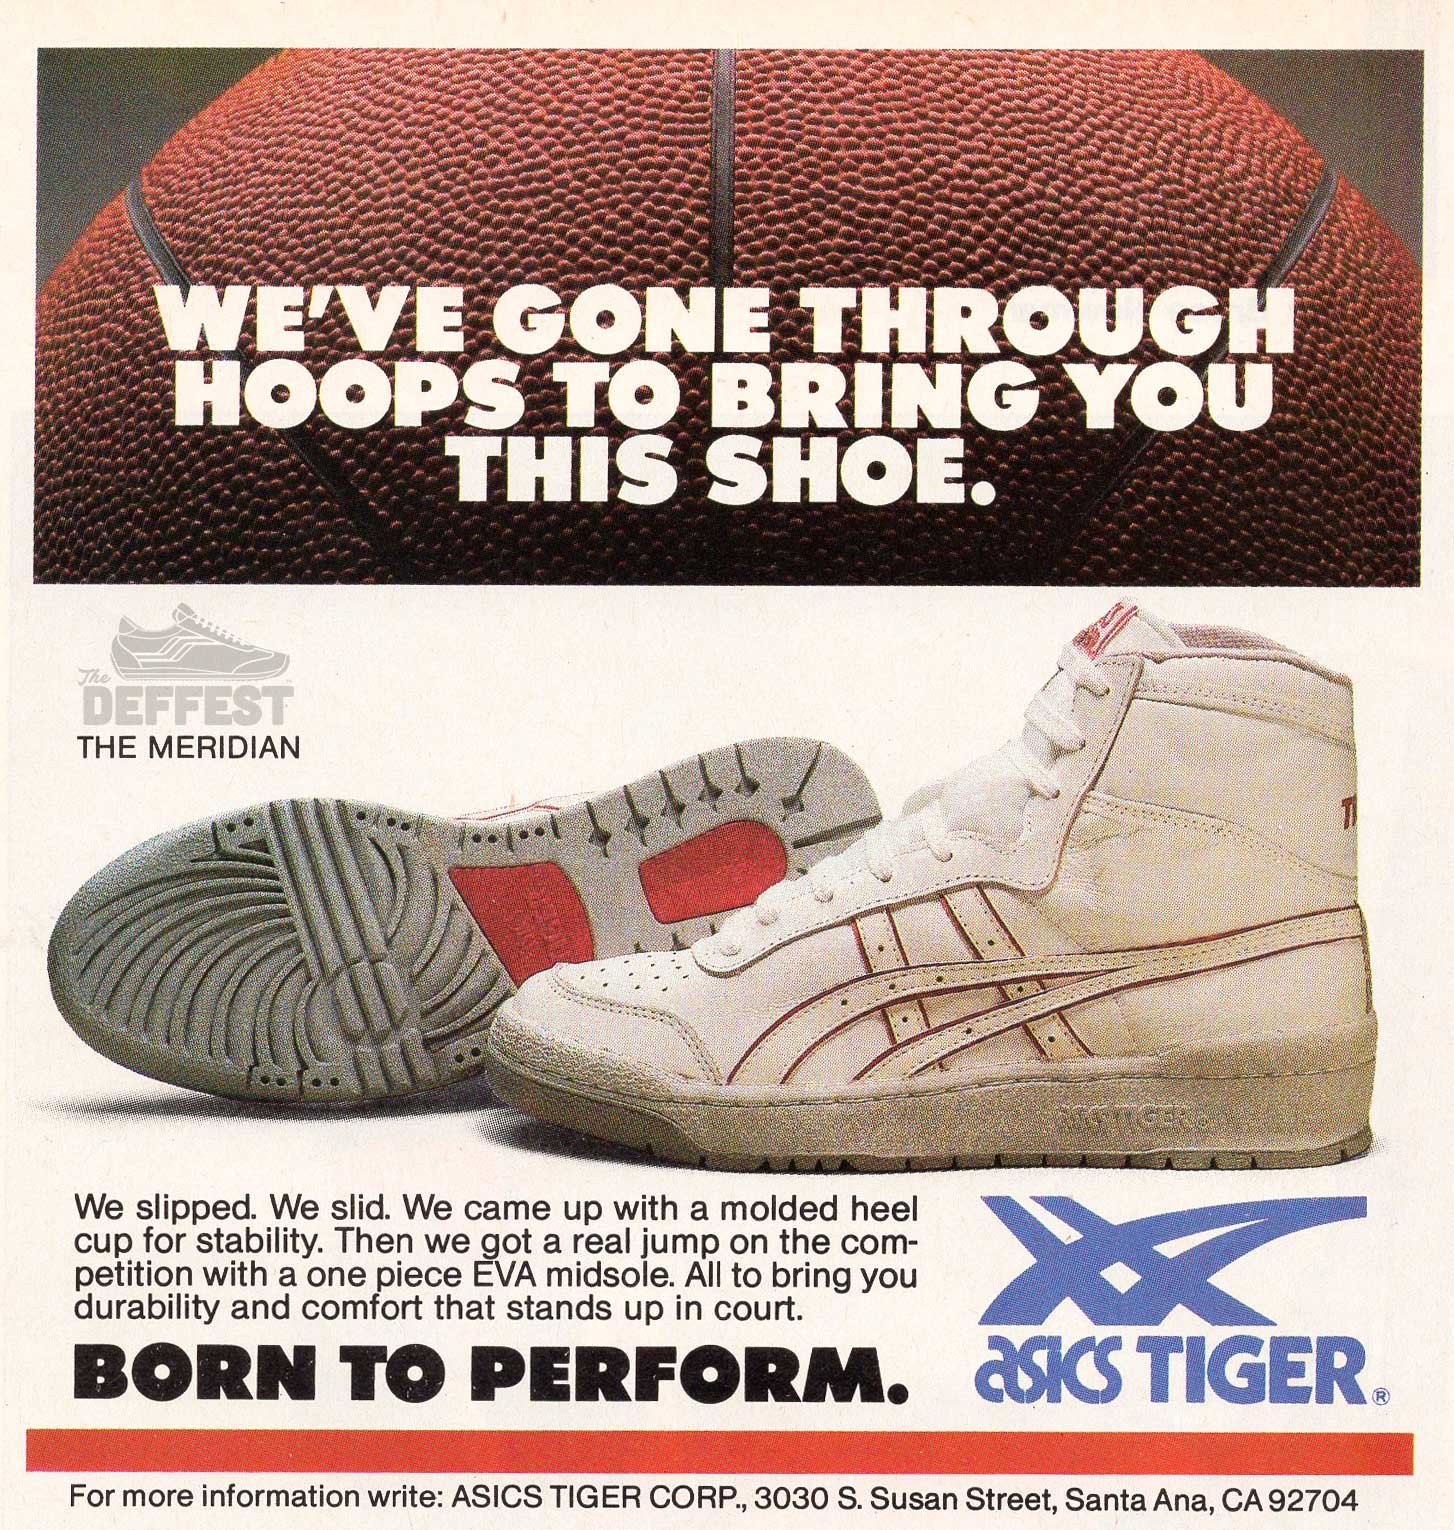 New Zealand afbalanceret Ofte talt The Deffest®. A vintage and retro sneaker blog. — Hoop Stars: Asics Tiger  The Meridian 1986 Vintage High Top Shoes Basketball Sneakers